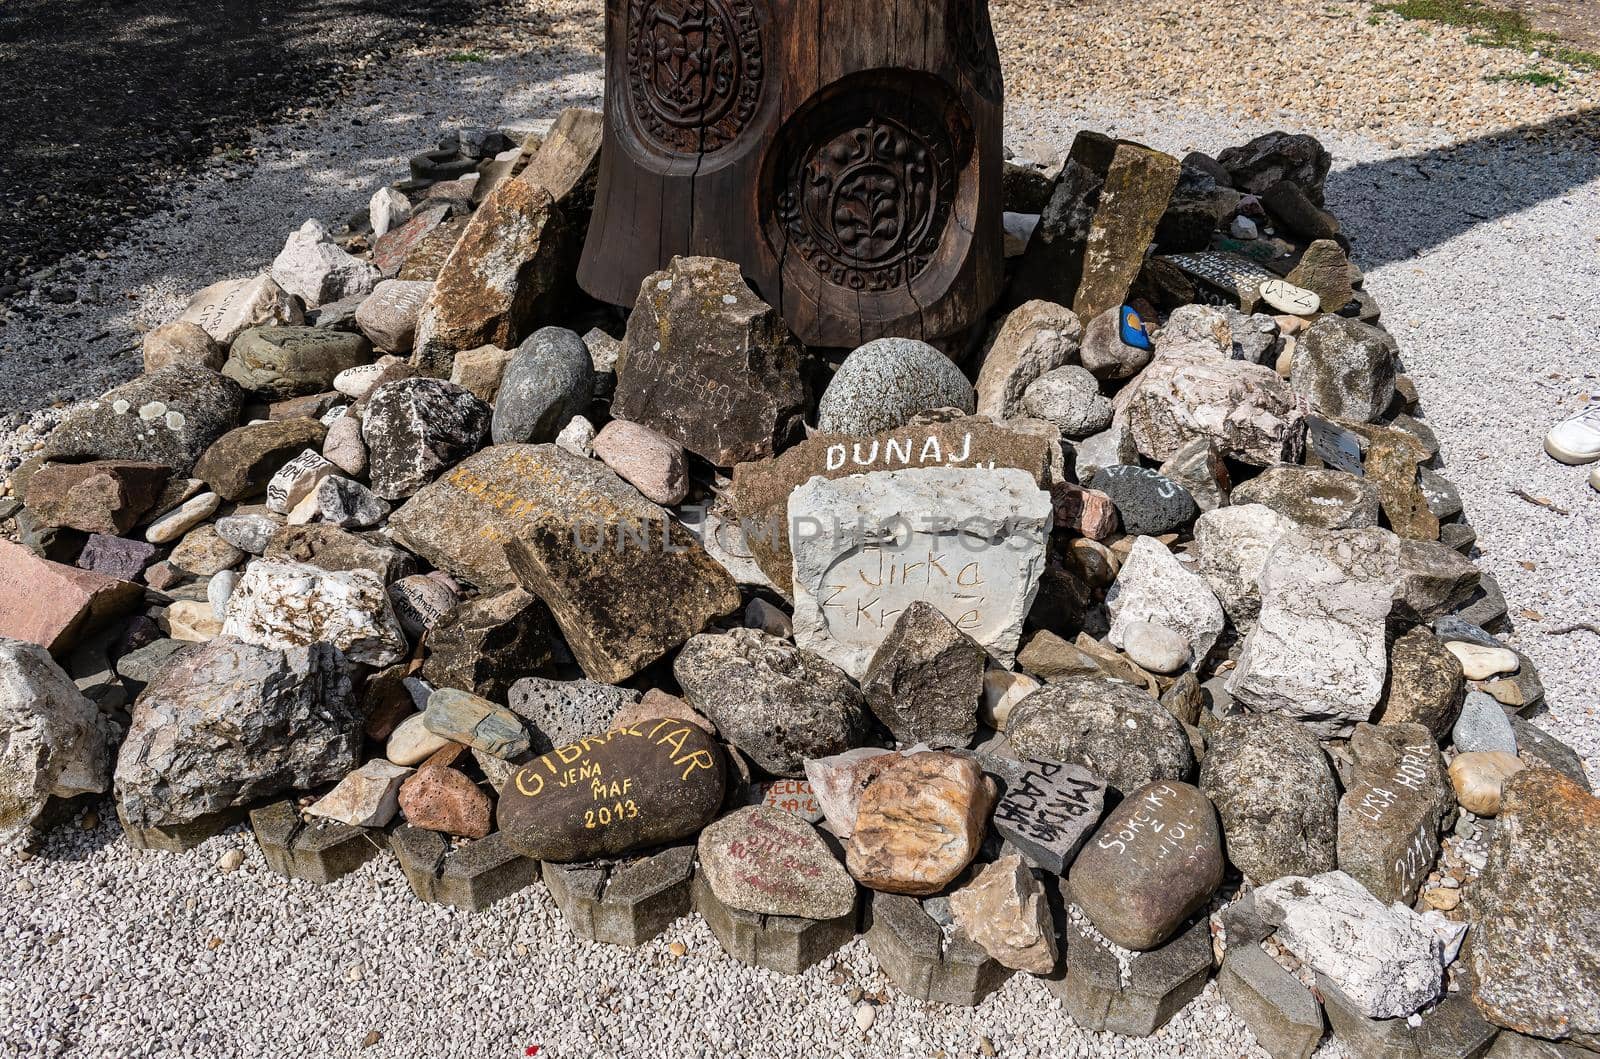 Stones with inscriptions from places from different parts of the world in a sweat place under the cross II by rostik924